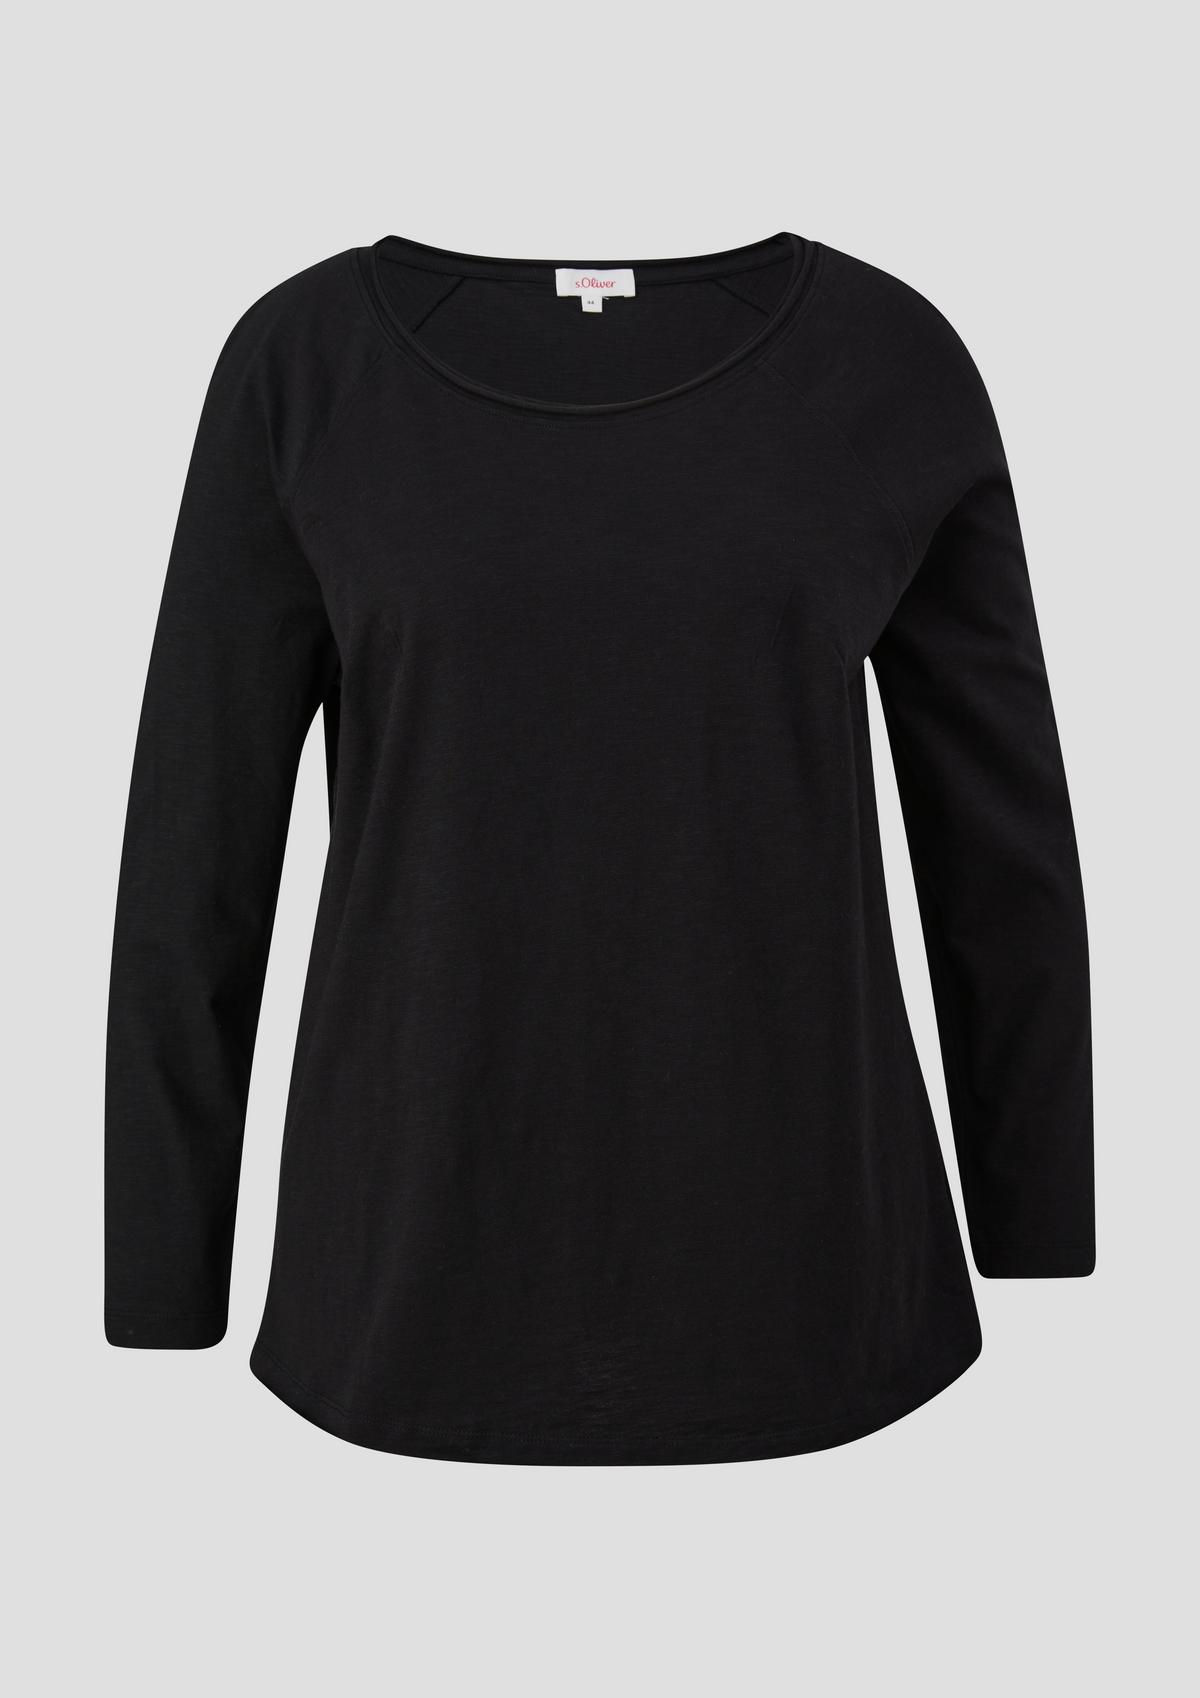 s.Oliver Long sleeve top with a slub texture